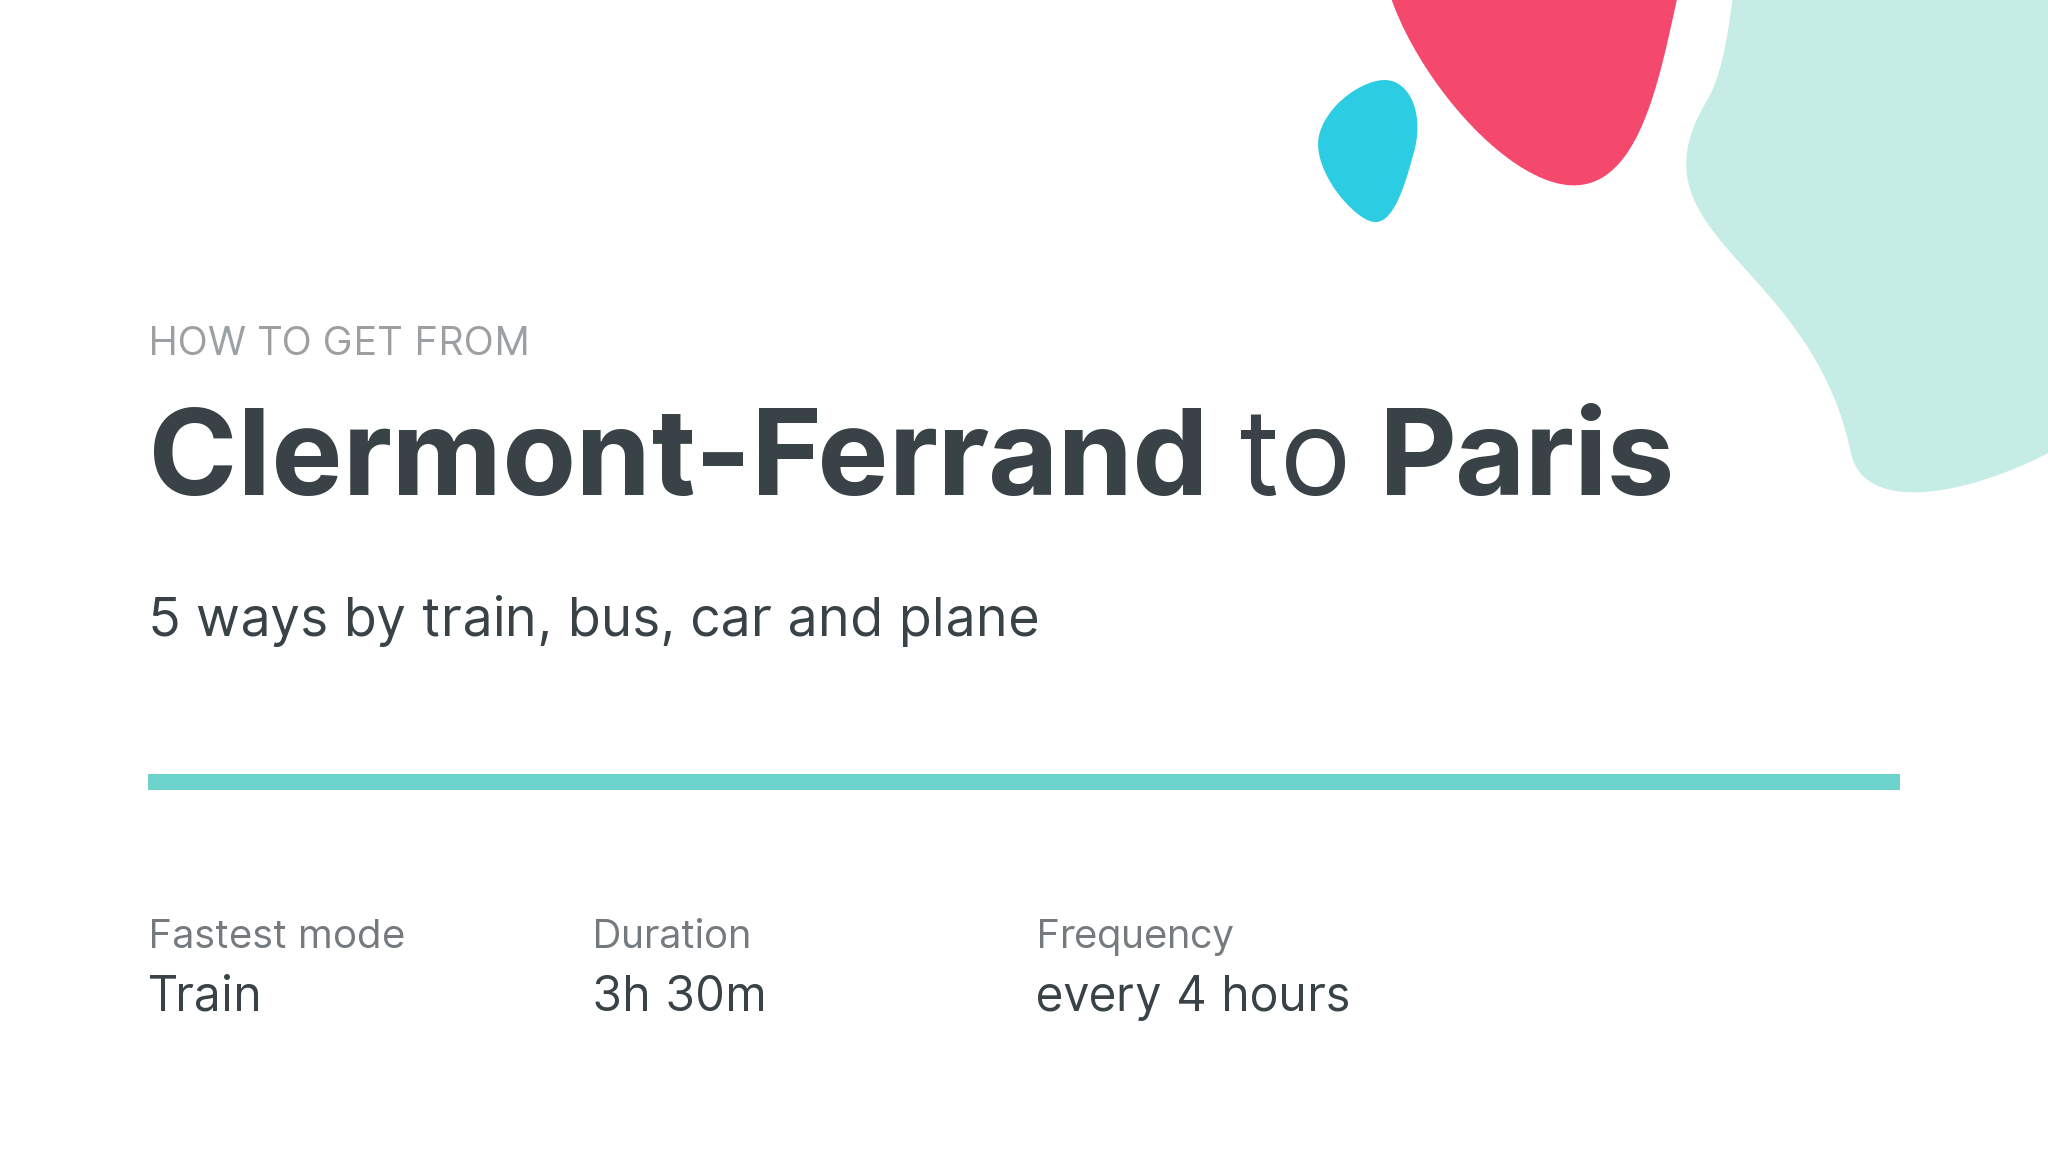 How do I get from Clermont-Ferrand to Paris